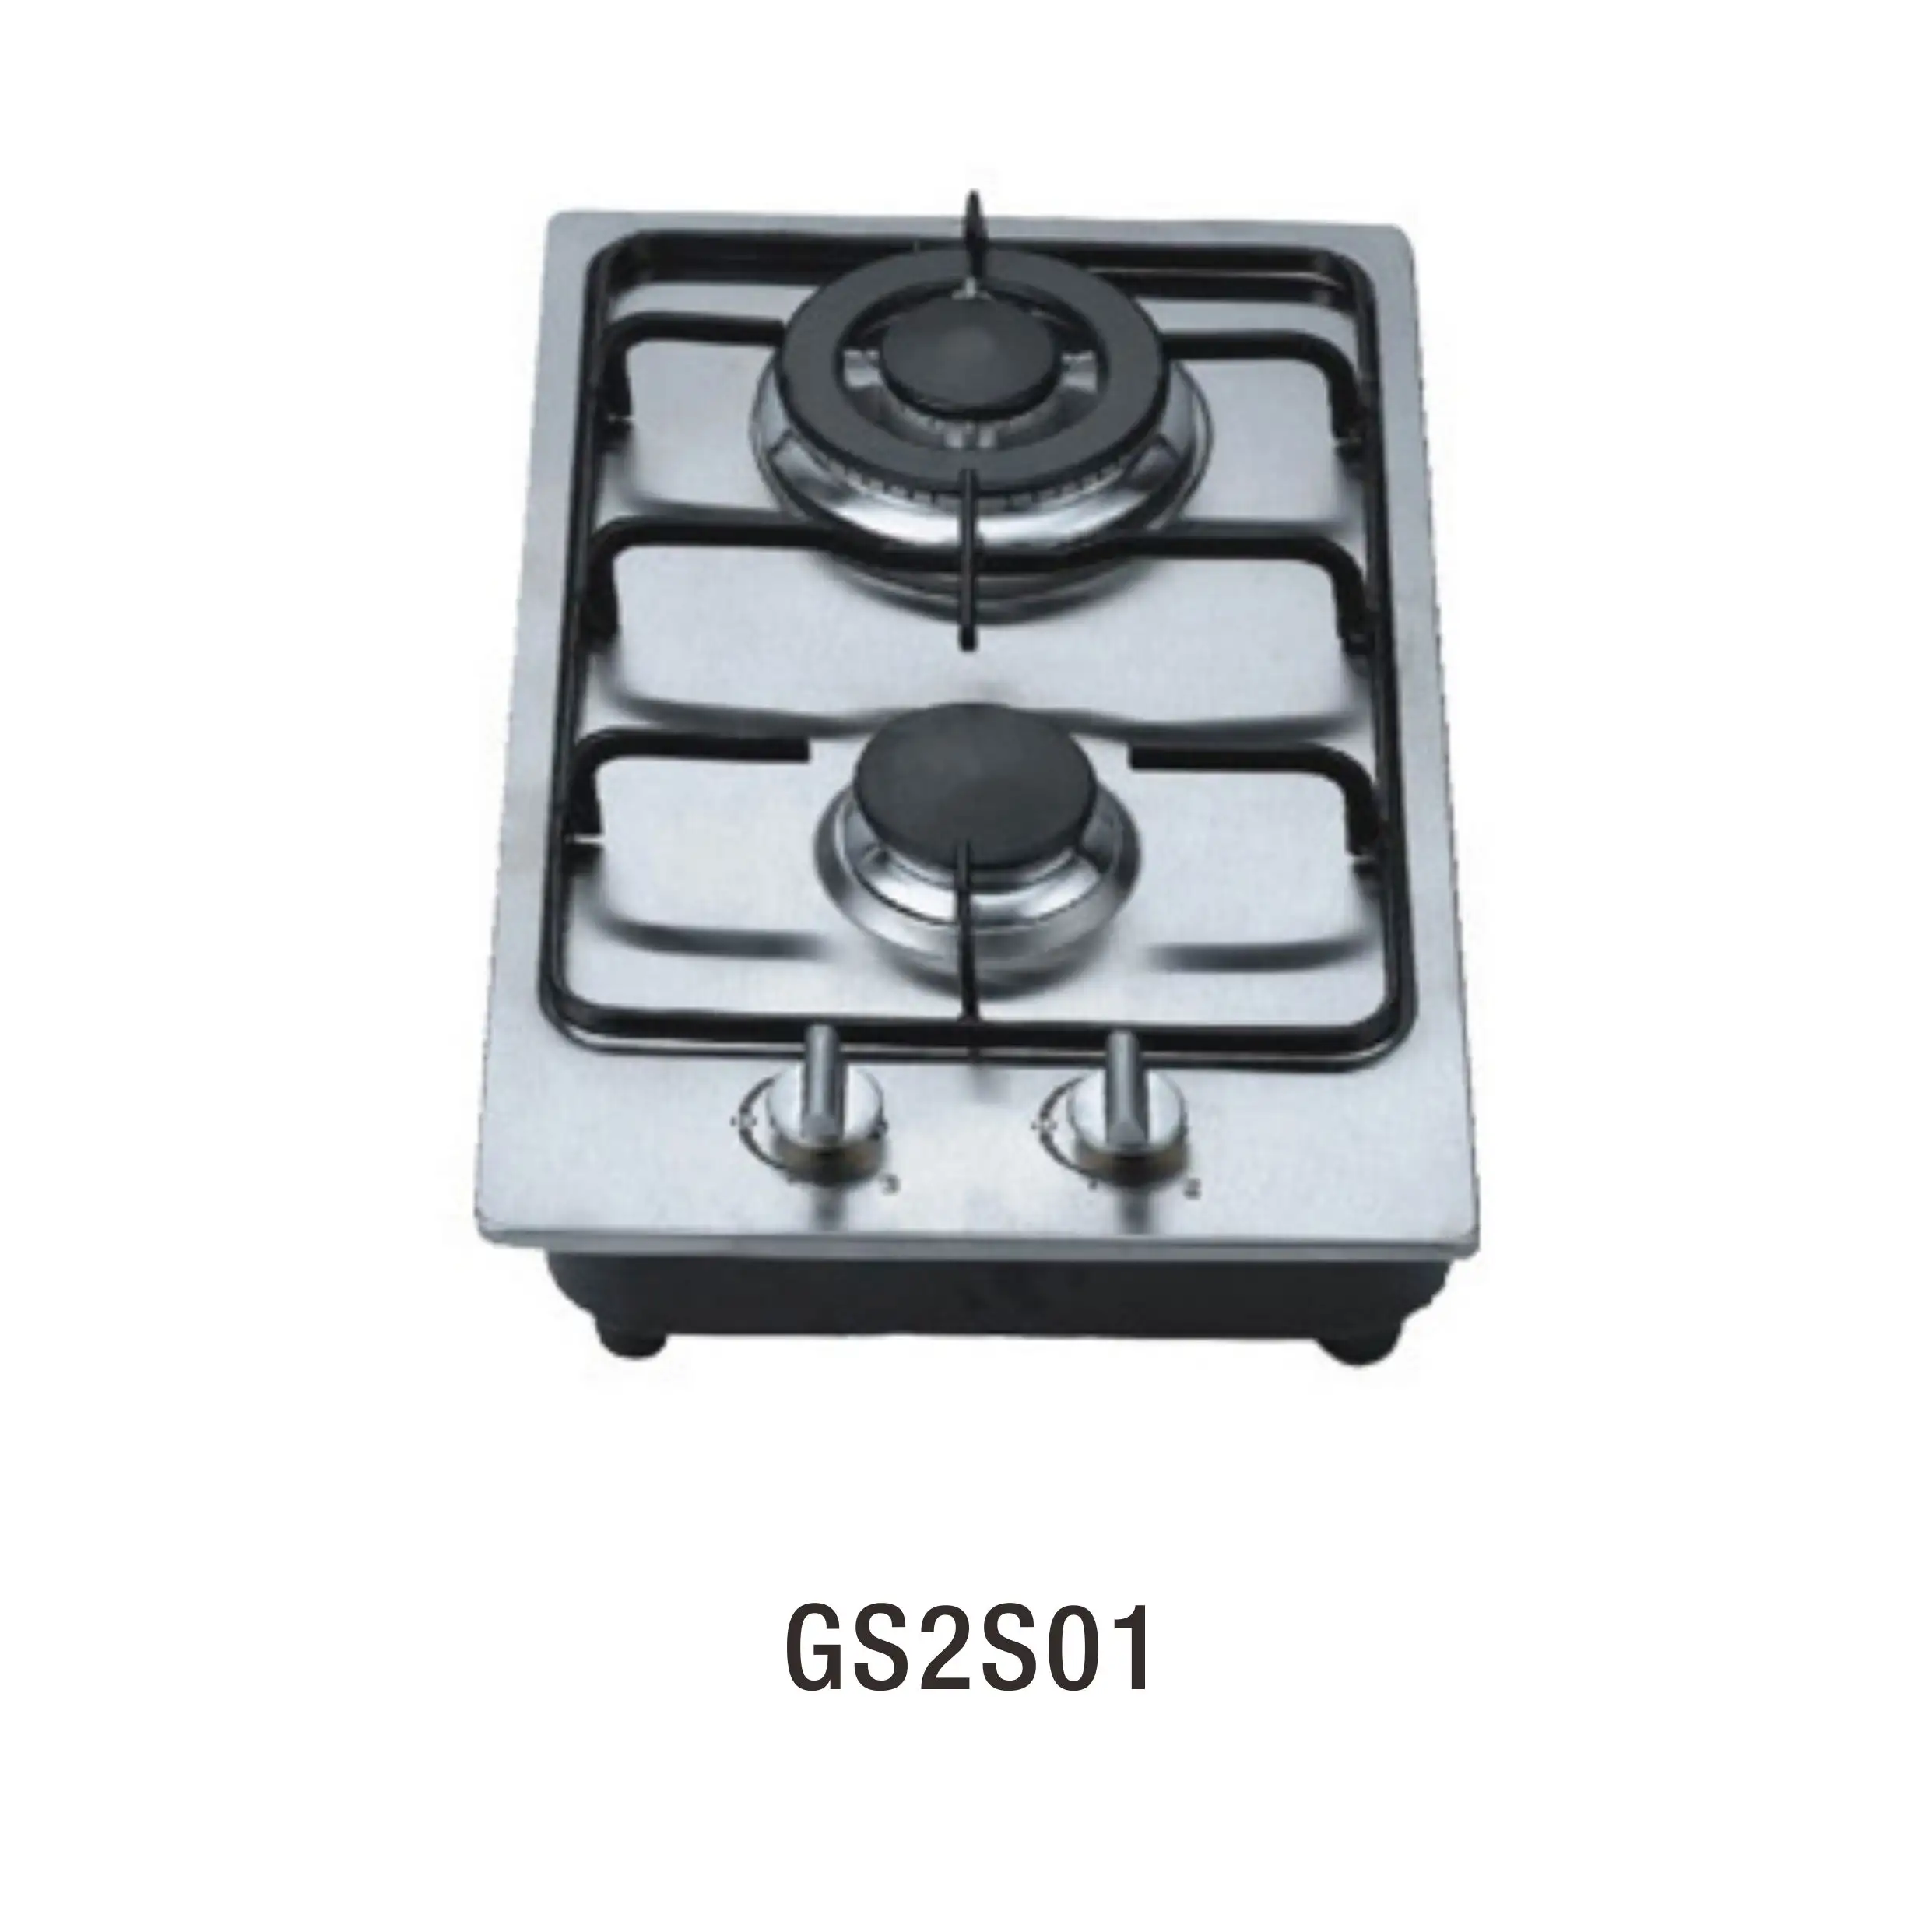 GS2S01 Fvgor 2 burners Stainless Steel gas stove desktop surfaces gas cooktop